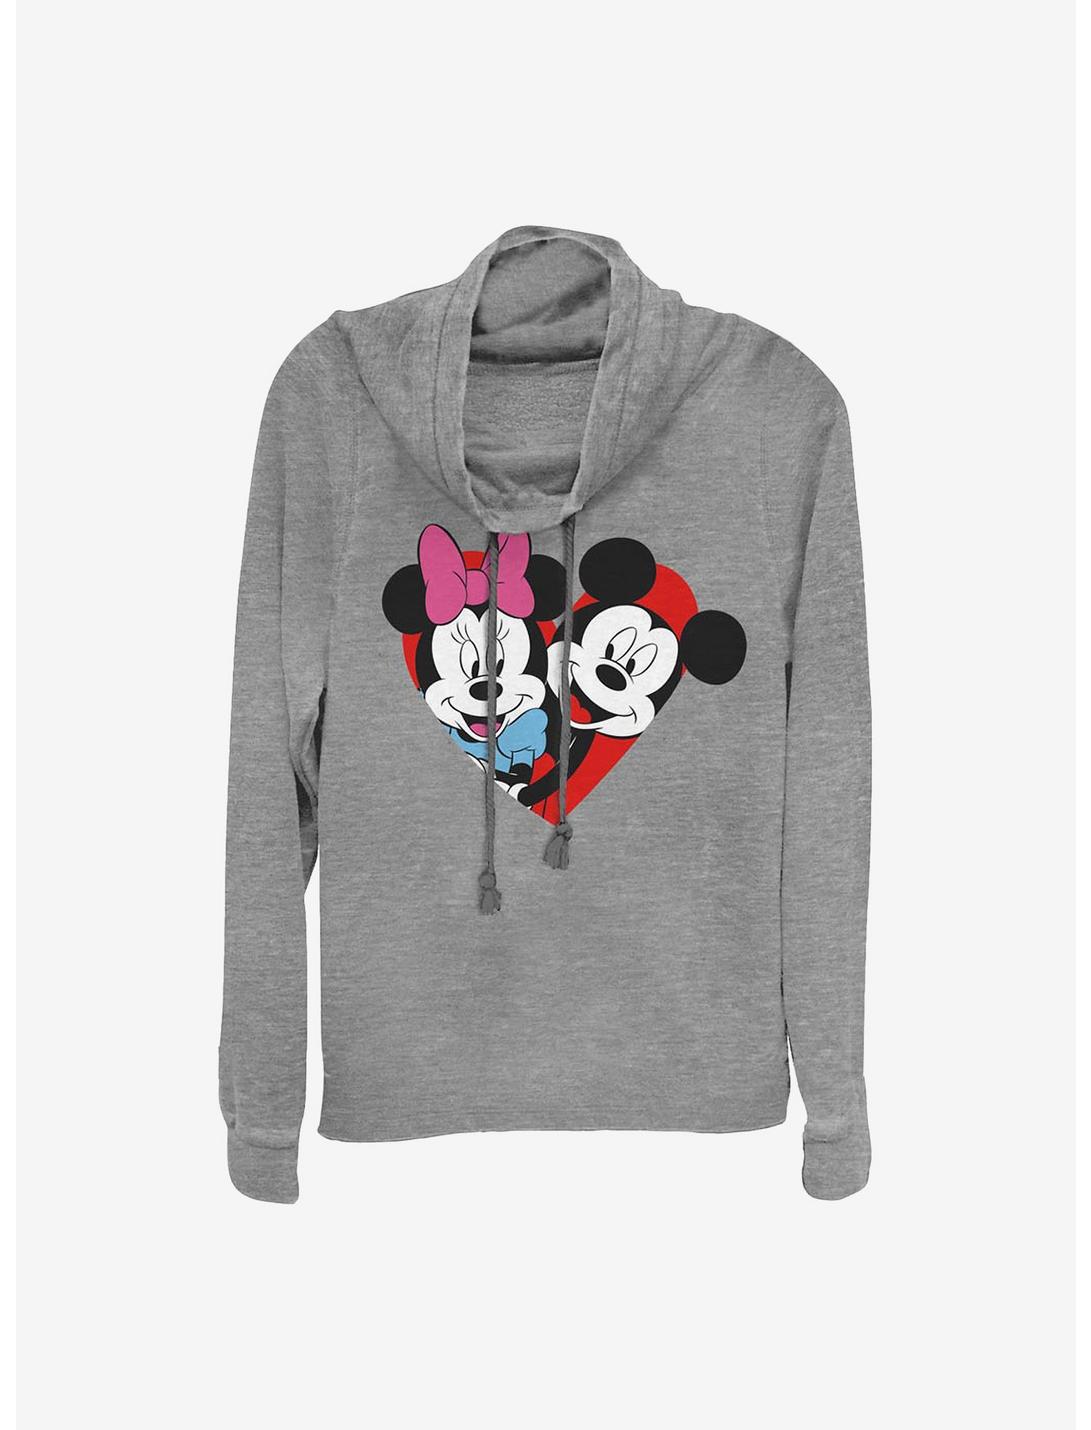 Disney Mickey Mouse Mickey Minnie Heart Cowlneck Long-Sleeve Girls Top, GRAY HTR, hi-res